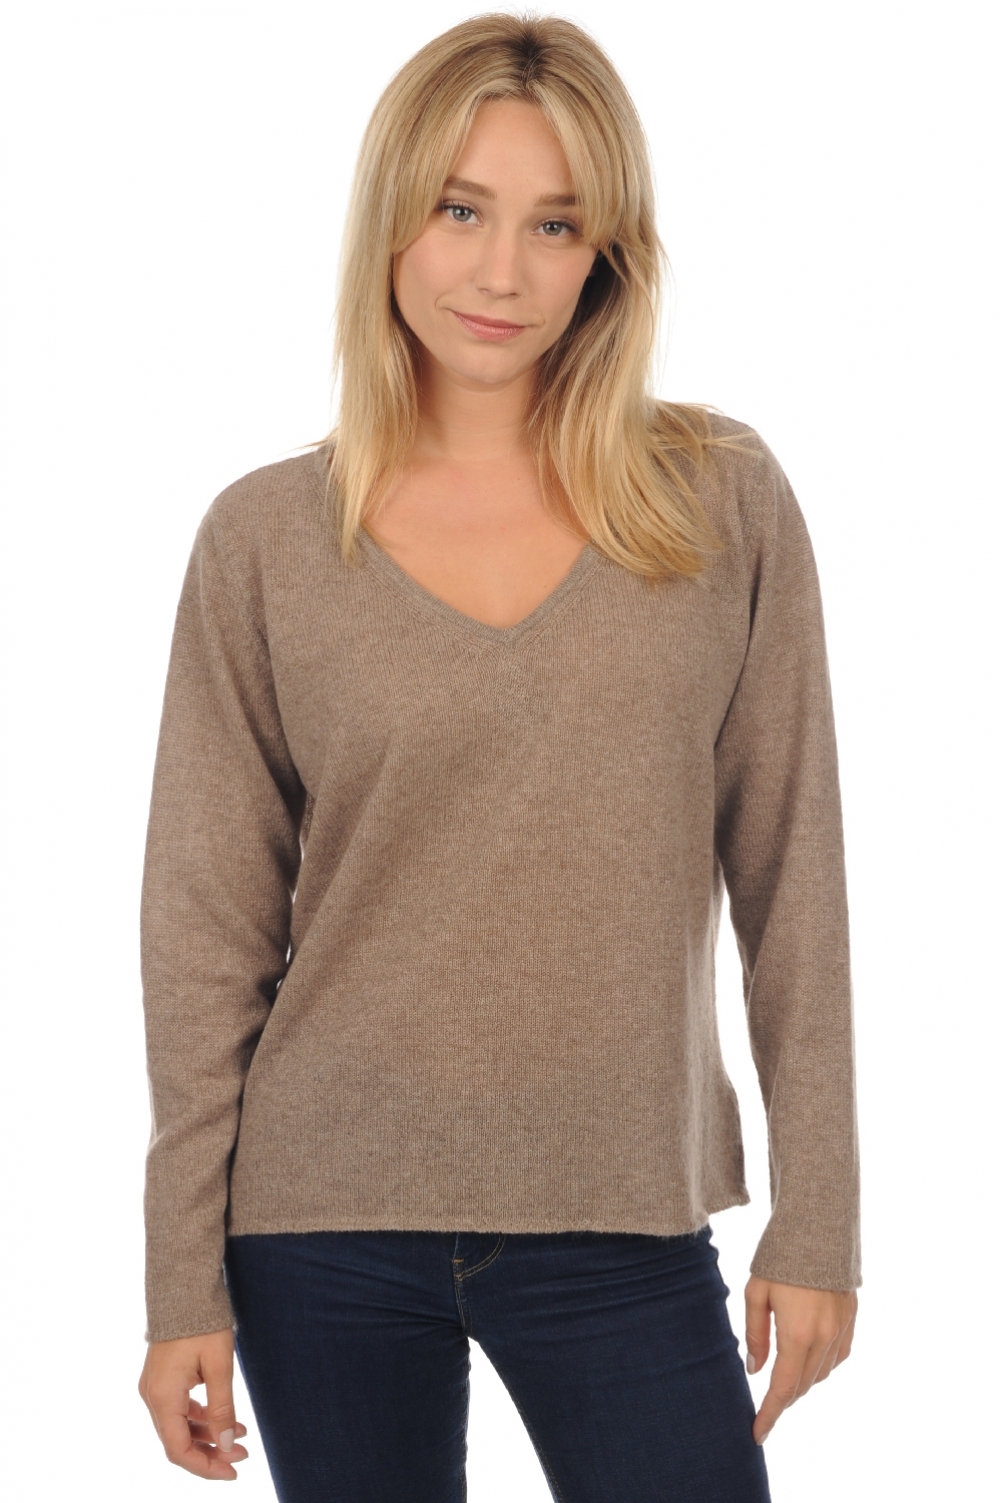 Cachemire pull femme flavie natural brown xs